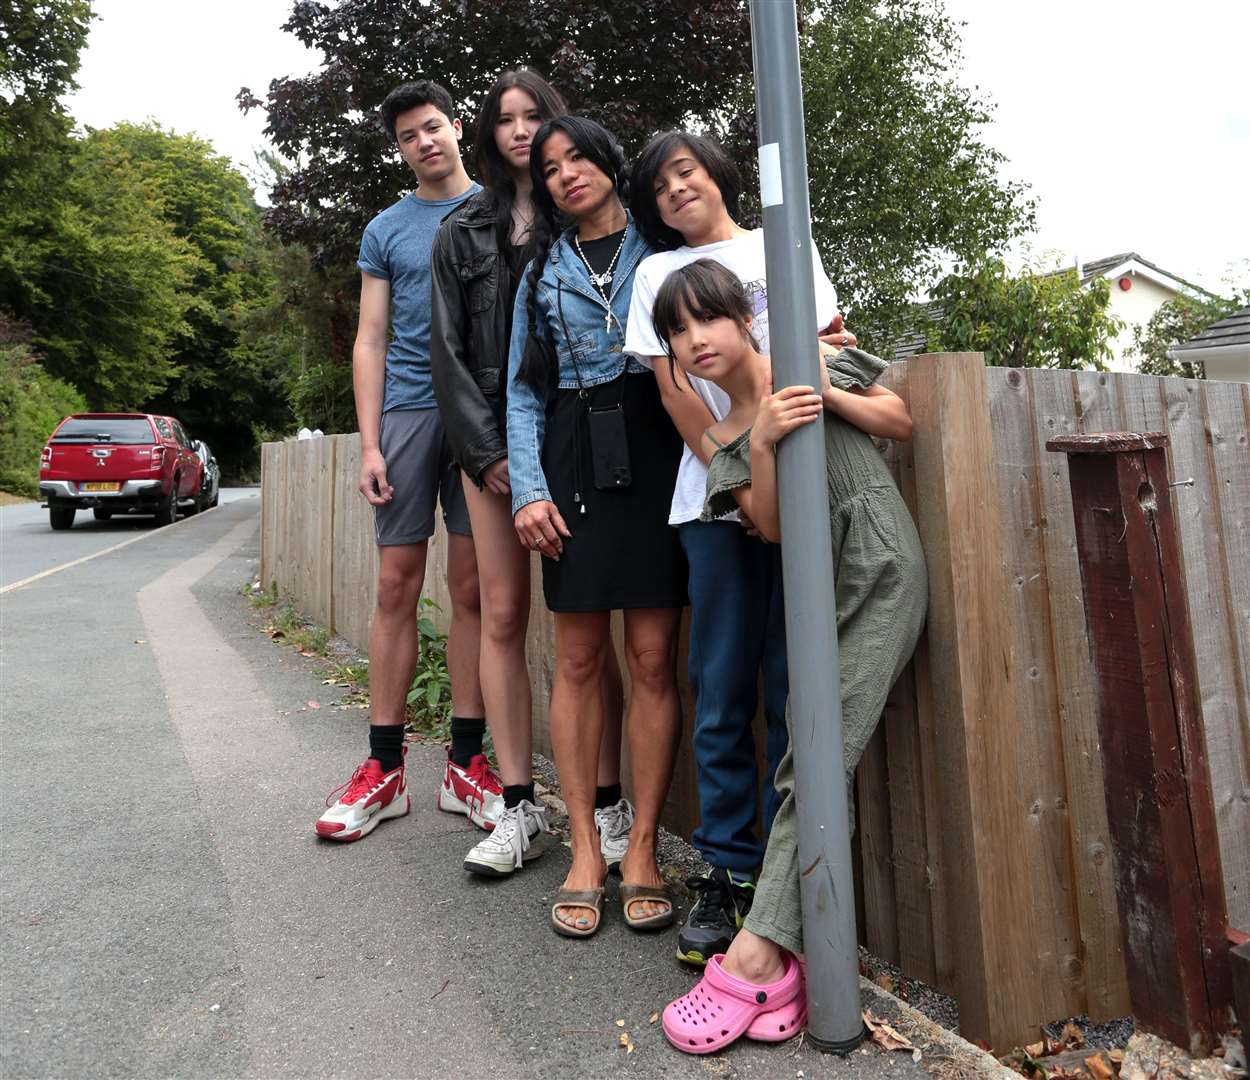 Young protesters at a bus stop in Mill Lane, Shepherdswell.  Photo by Nigel Bowles